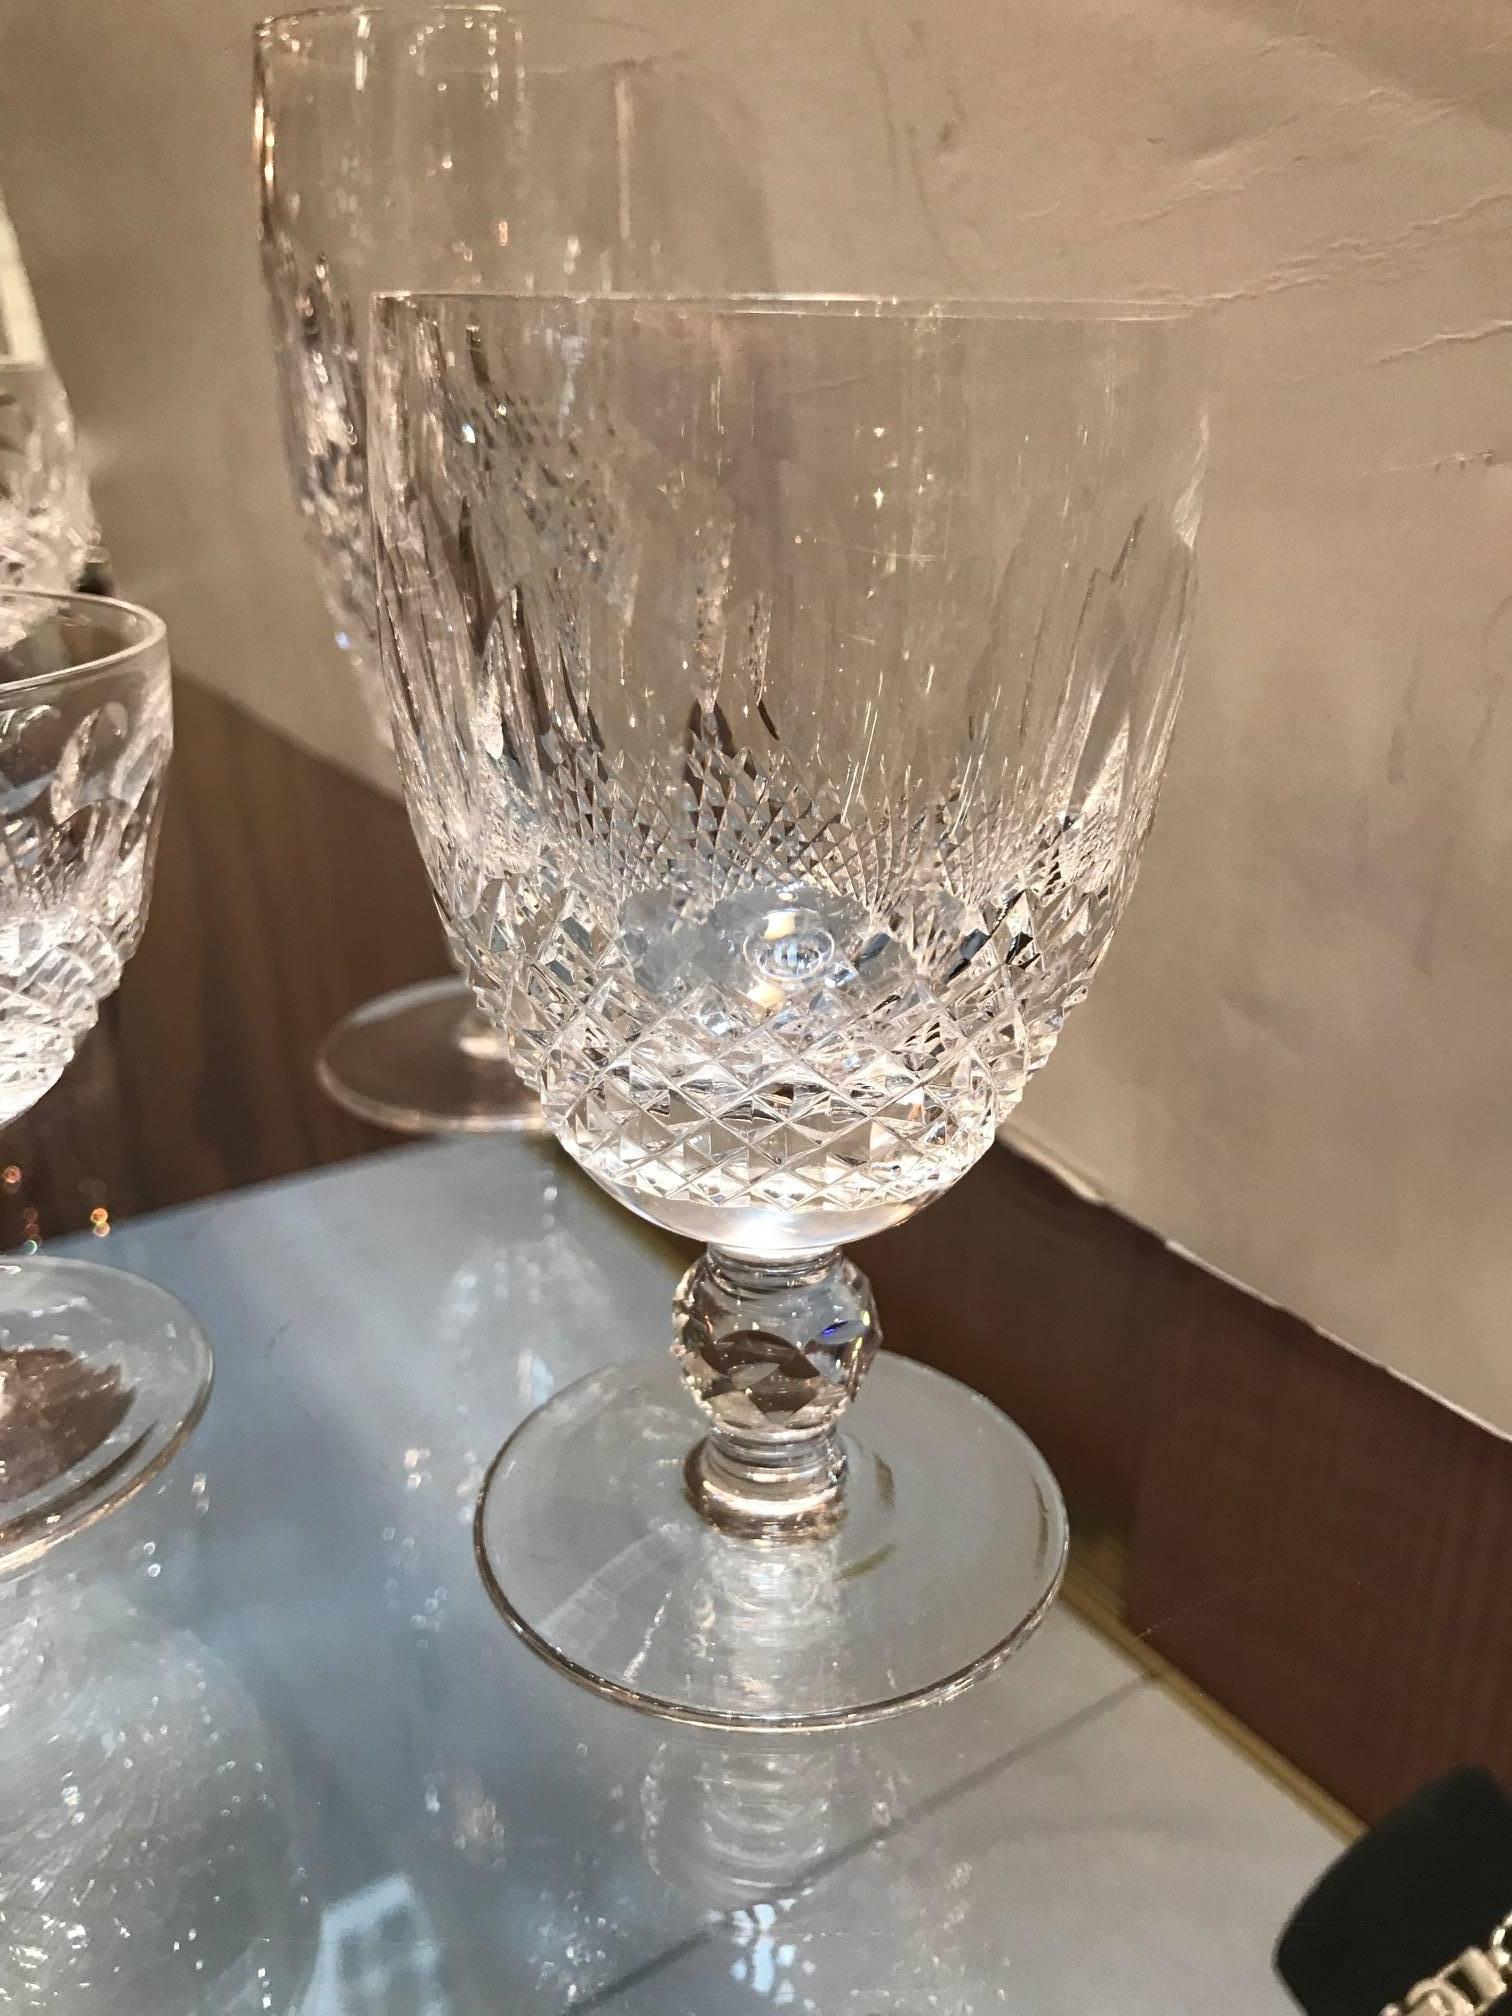 An extensive set of Waterford Irish crystal with 12 pcs of 5 sized stems. This is the original Waterford hand cut and polished crystal by master glass cutters for Waterford The pattern is the most desirable Colleen pattern. 

12-6 in. fluted